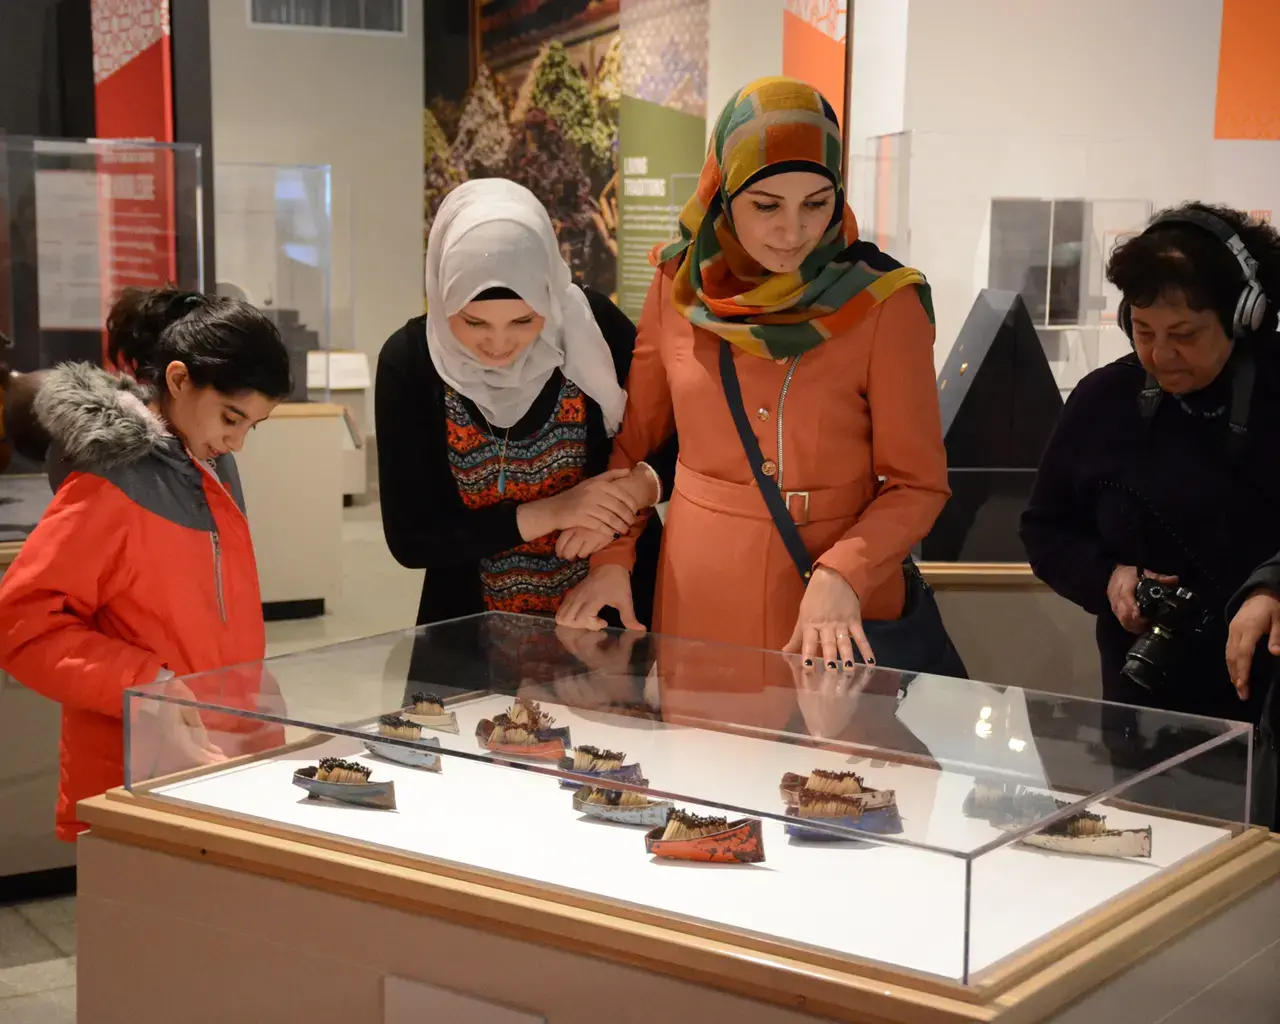 Visitors at Penn Museum&rsquo;s Cultures in the Crossfire: Stories from Syria and Iraq around a work by Syrian-born artist Issam Kourbaj. Photo courtesy of Penn Museum.